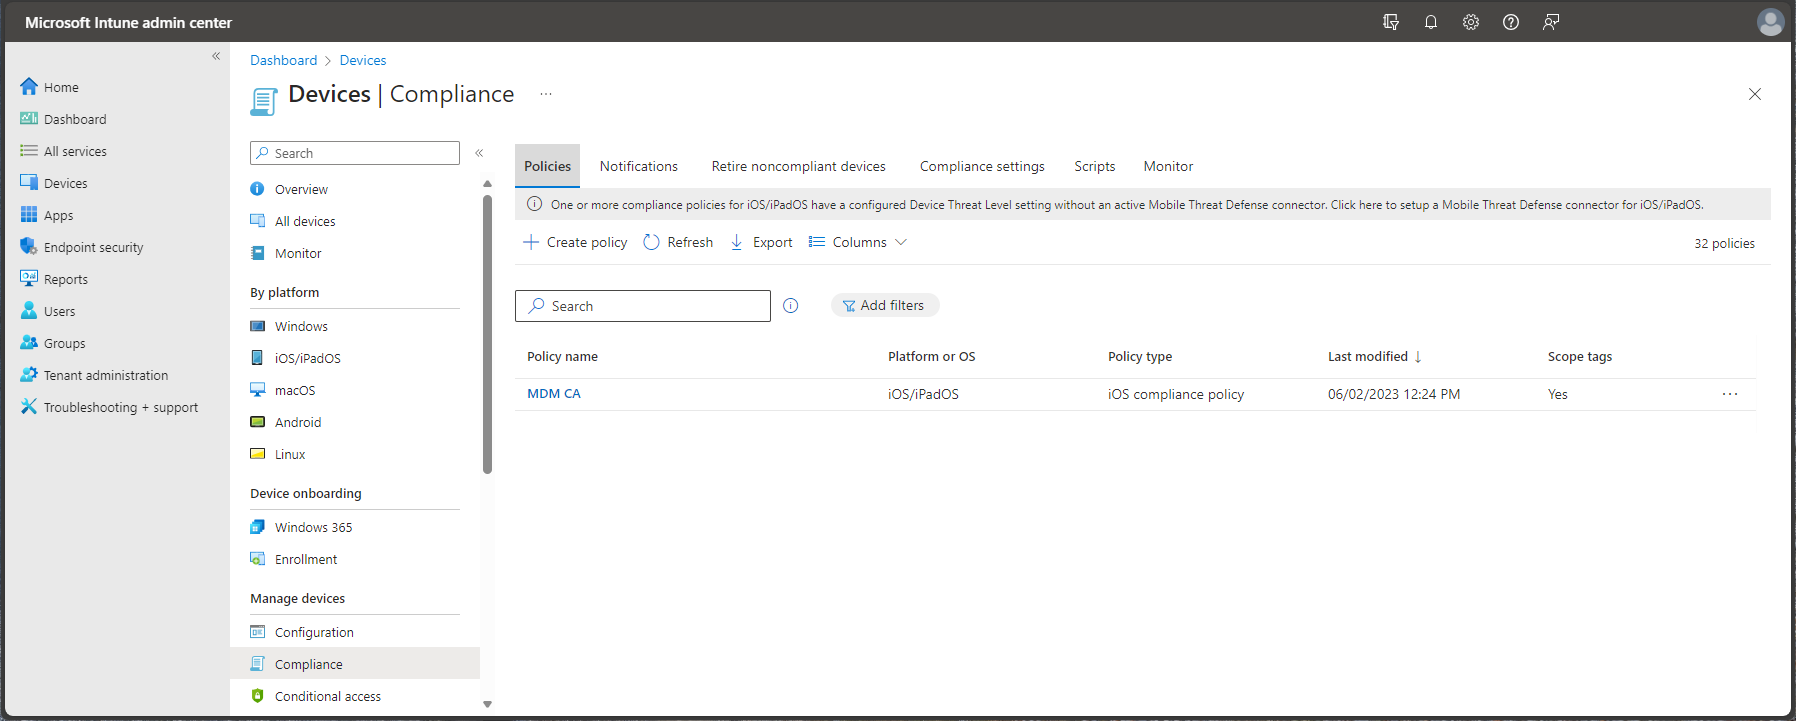 Screenshot of the Microsoft Endpoint Manager admin center - Compliance policies